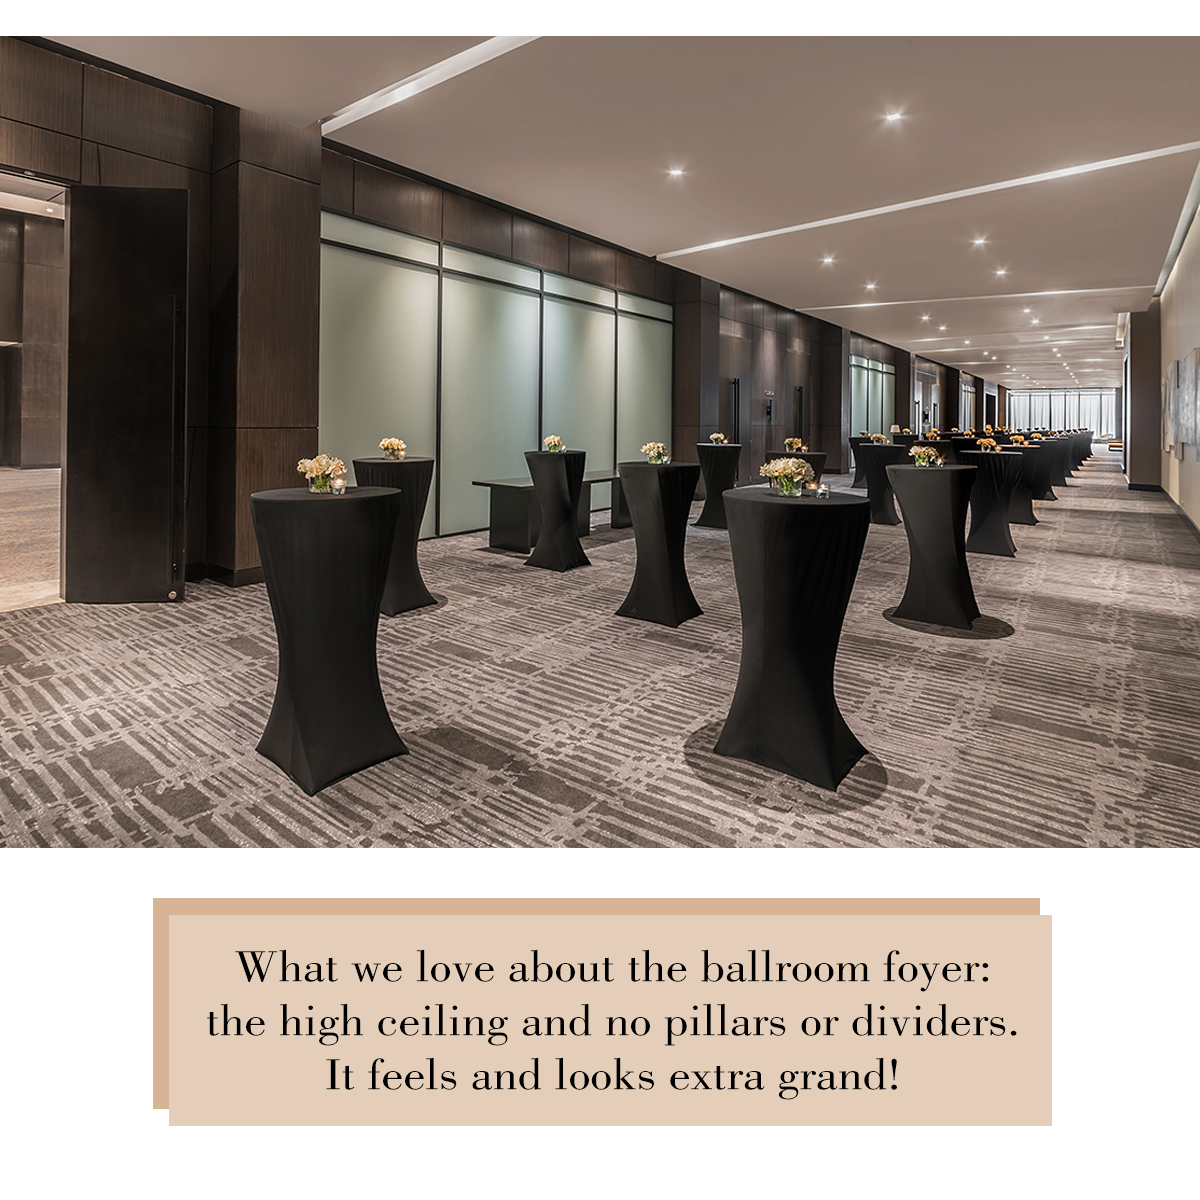 What we love about the ballroom foyer: the high ceiling and no pillars or dividers. It feels and looks extra grand!